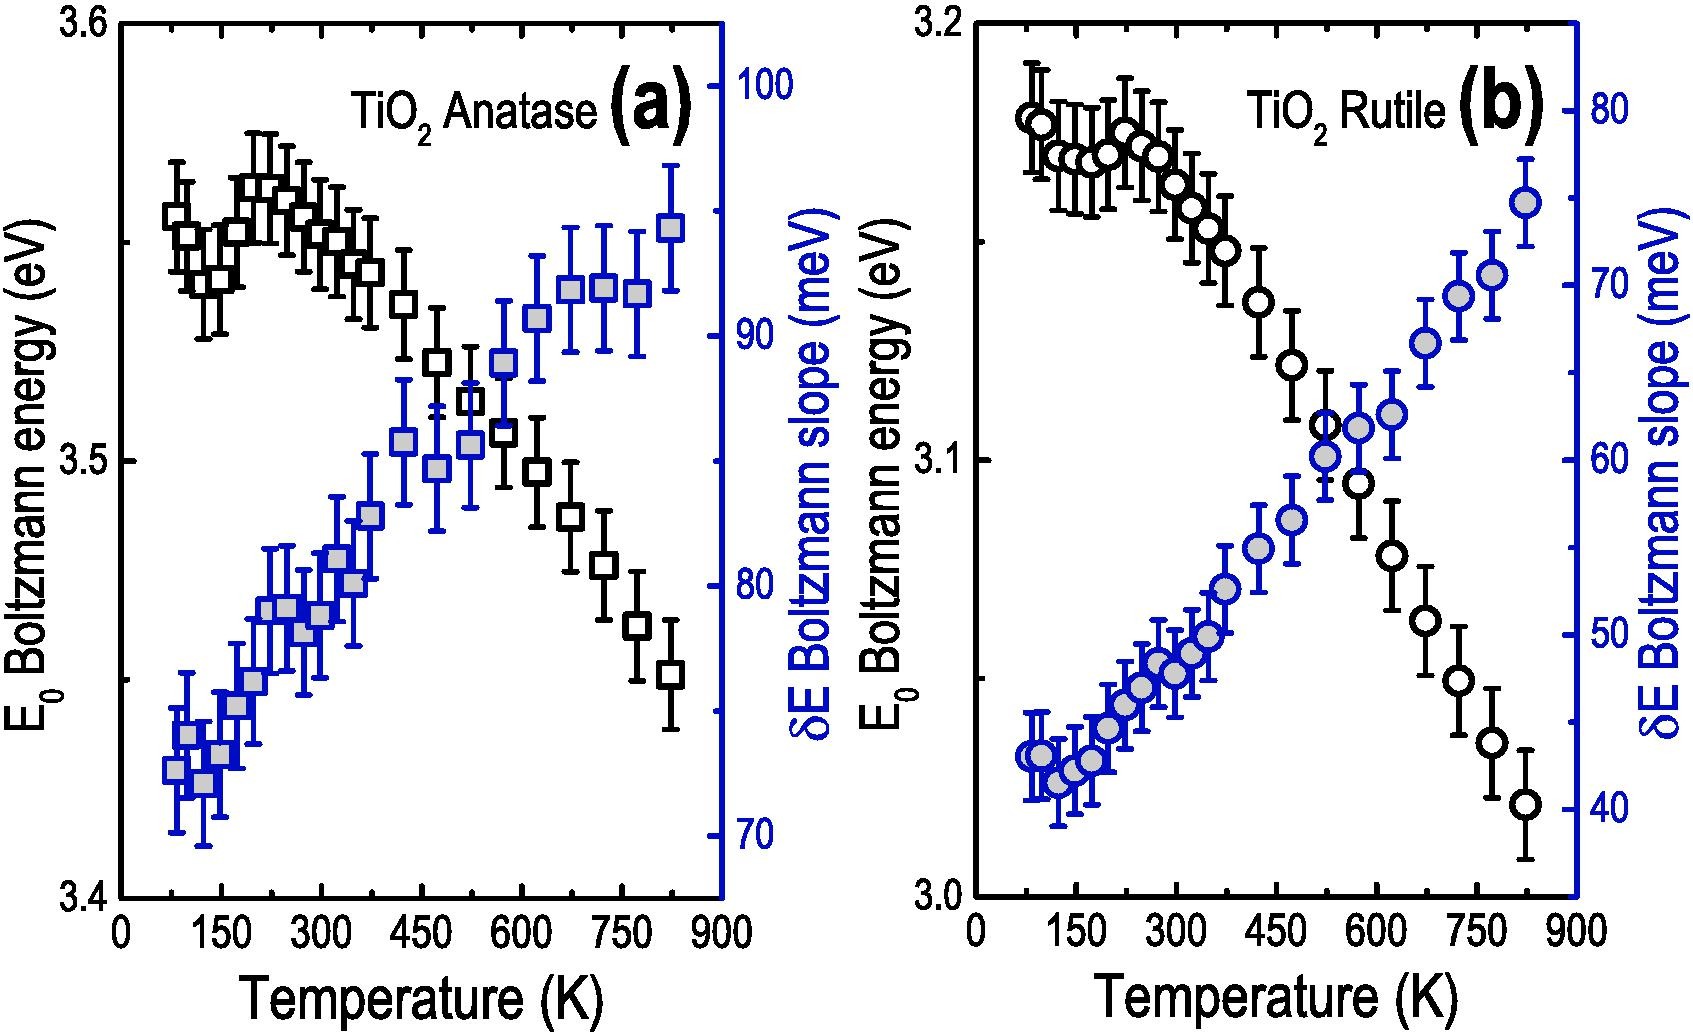 Temperature-dependent optical bandgap of TiO2 under the anatase and rutile phases.